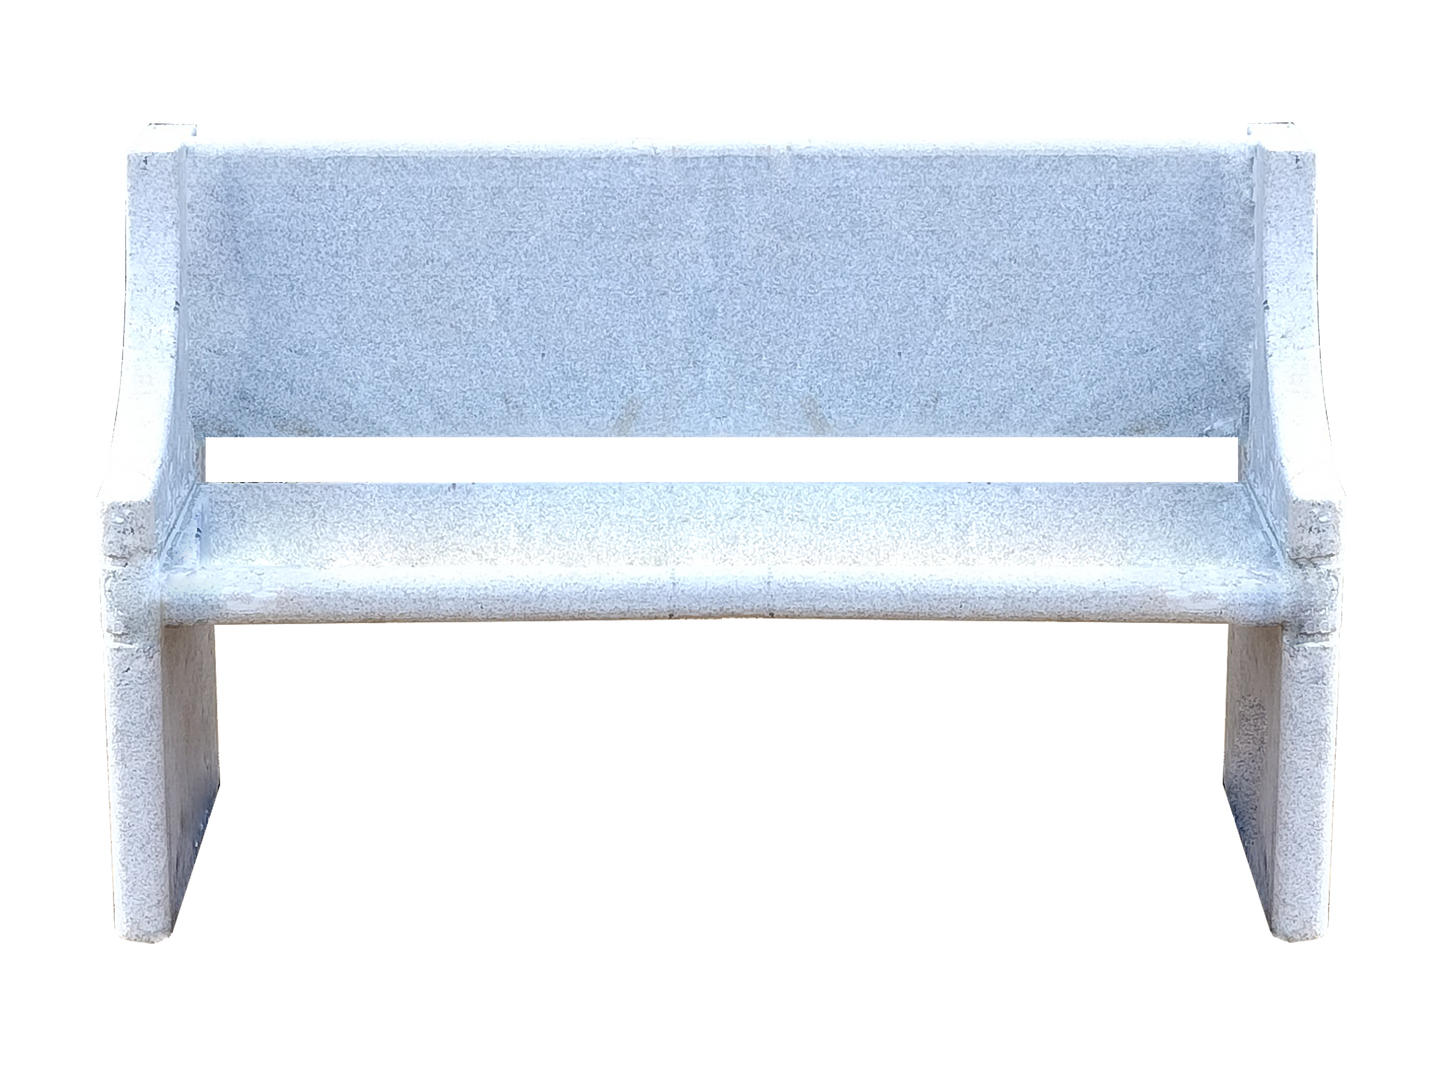 Embrace Nature with Outdoor Stone Park Benches | Granite Comforts | 5 Ft Long | 3 Inch Thickness Seater